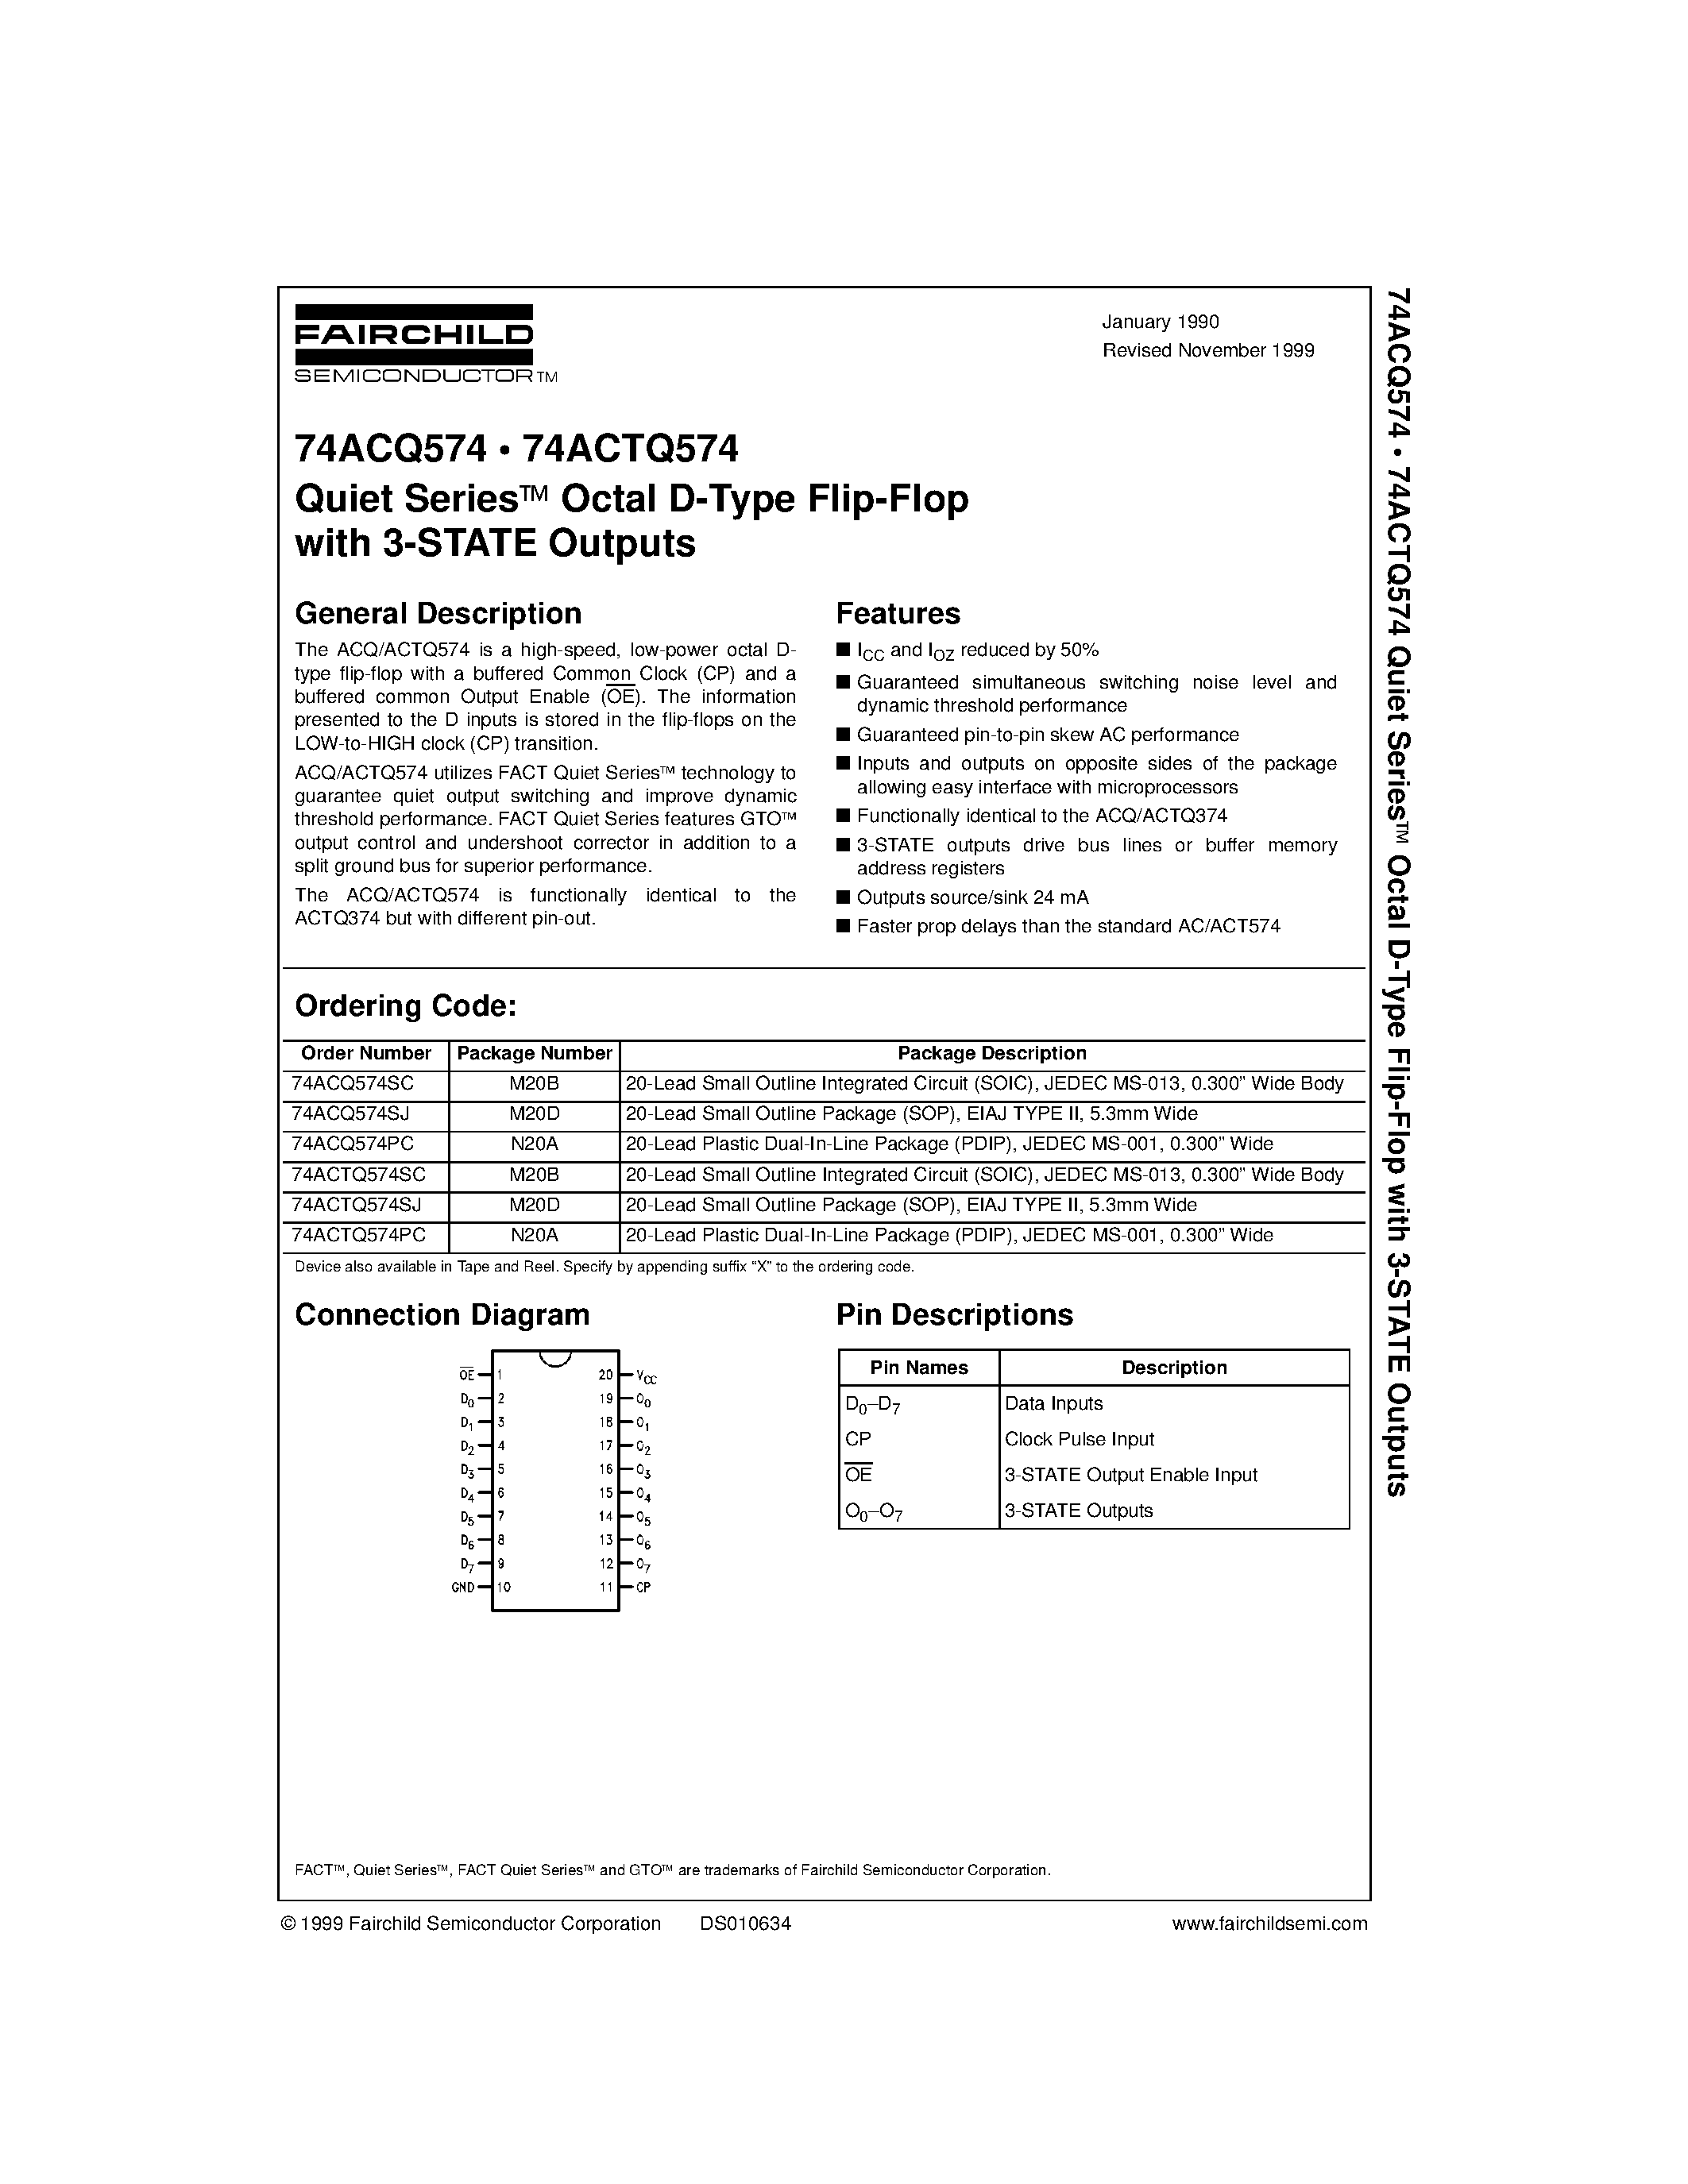 Datasheet 74ACQ574SJ - Quiet Series Octal D-Type Flip-Flop with 3-STATE Outputs page 1